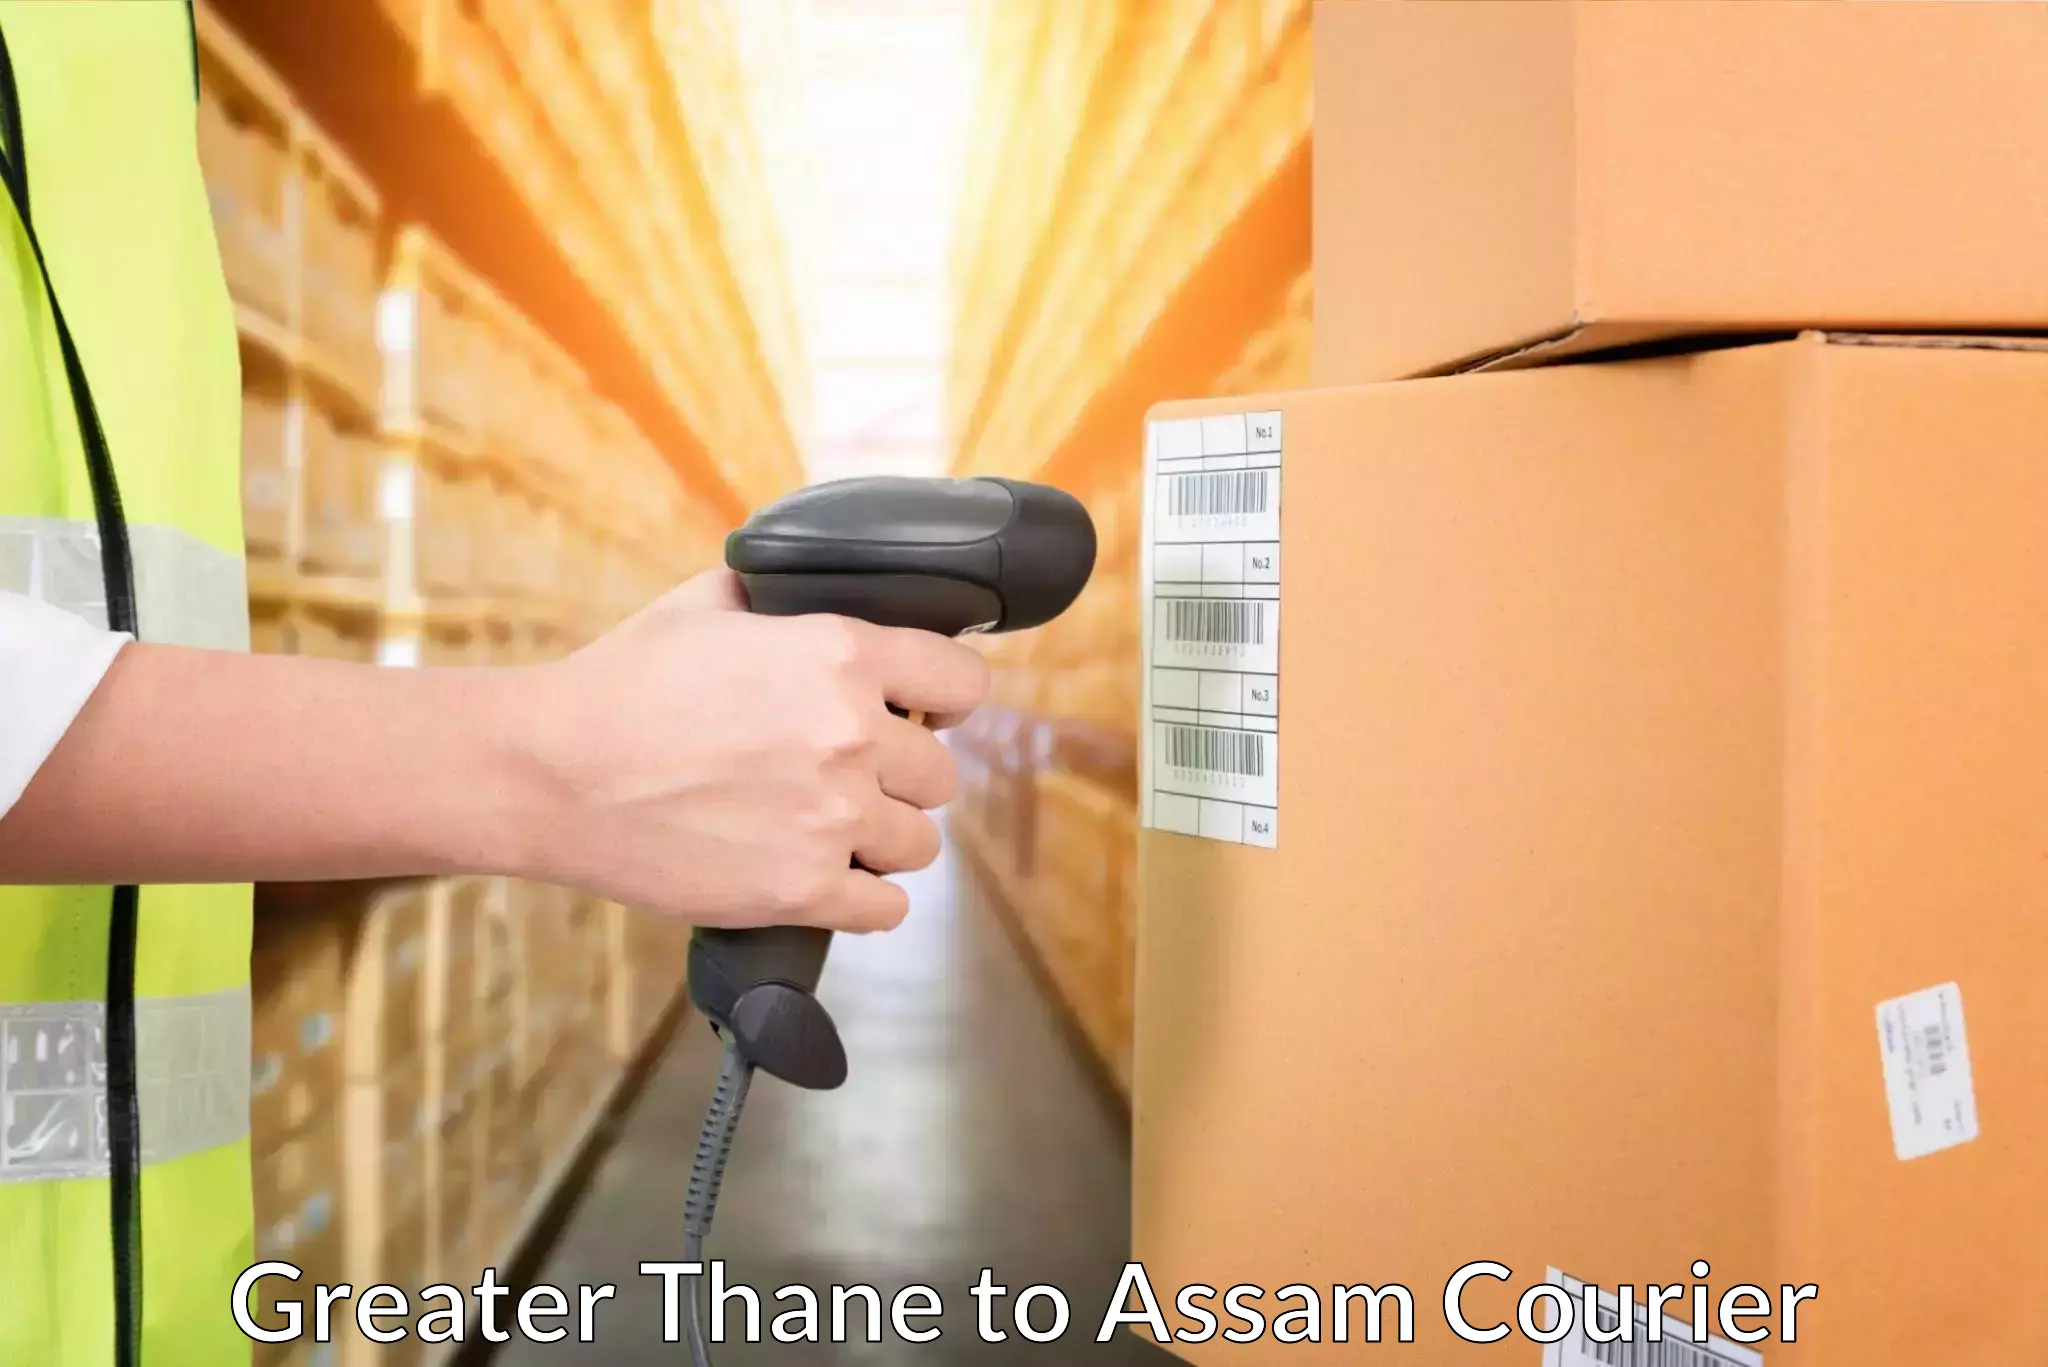 Delivery service partnership Greater Thane to Assam